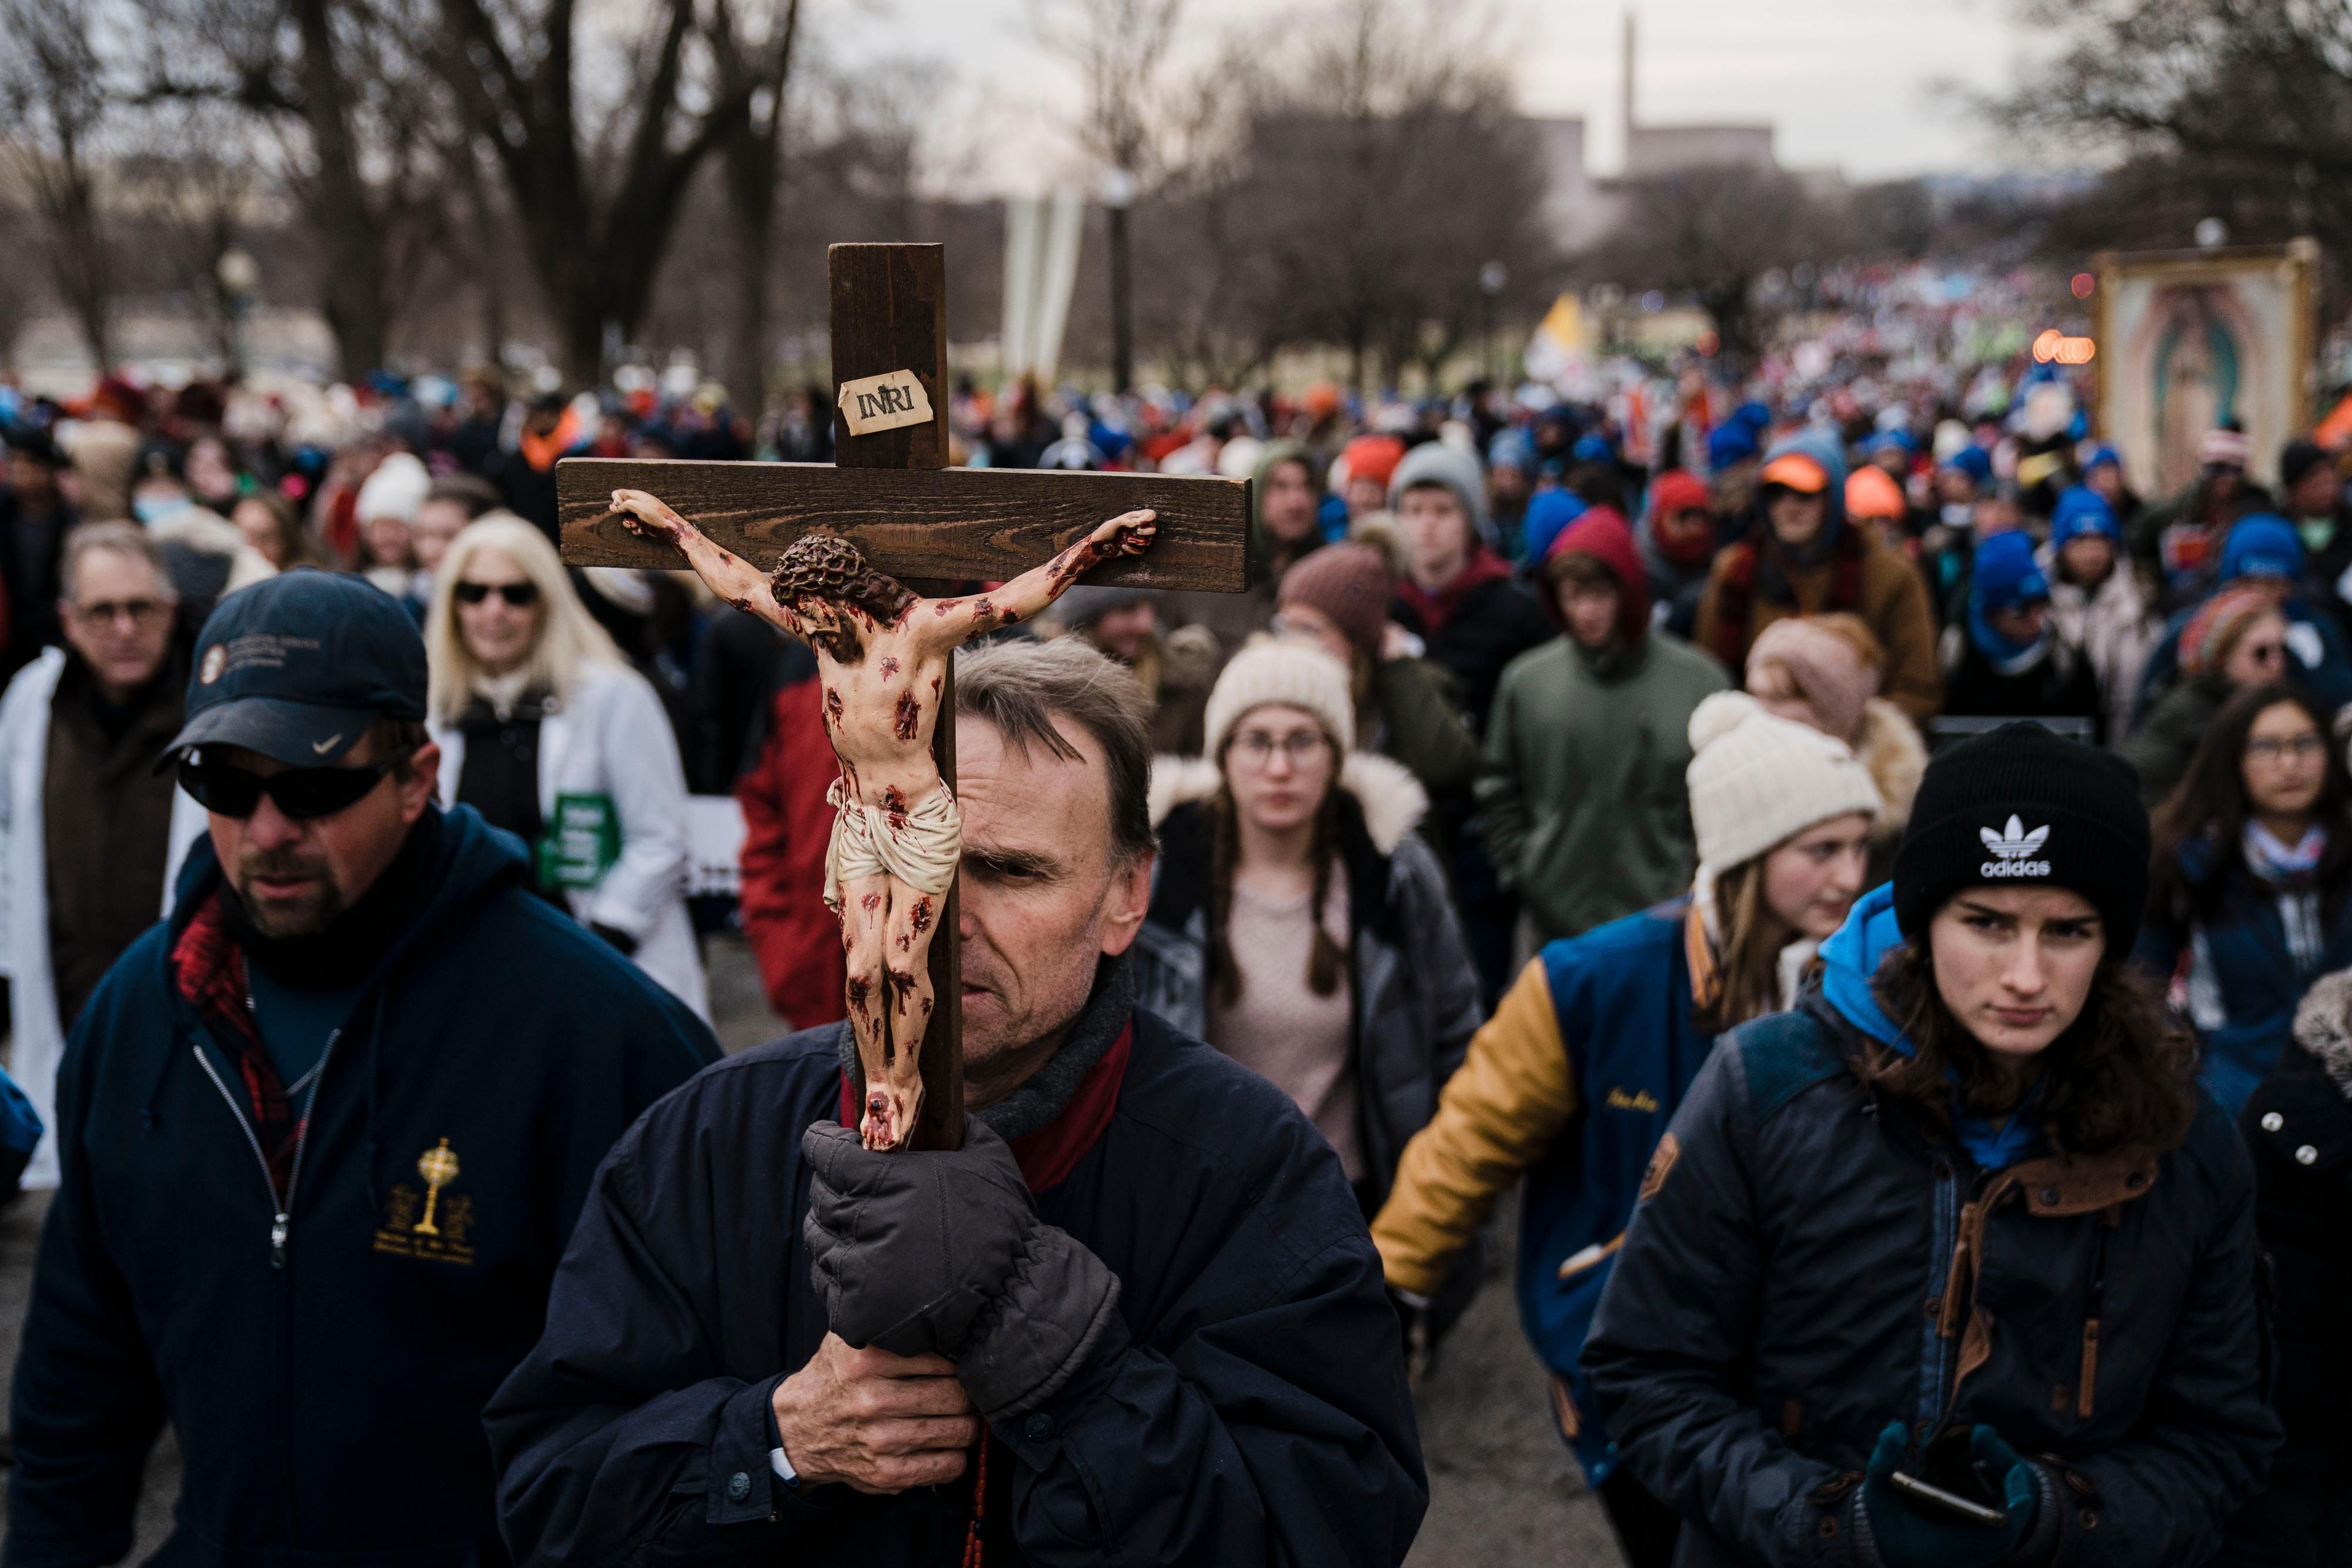 March for Life demonstrators in Washington, DC